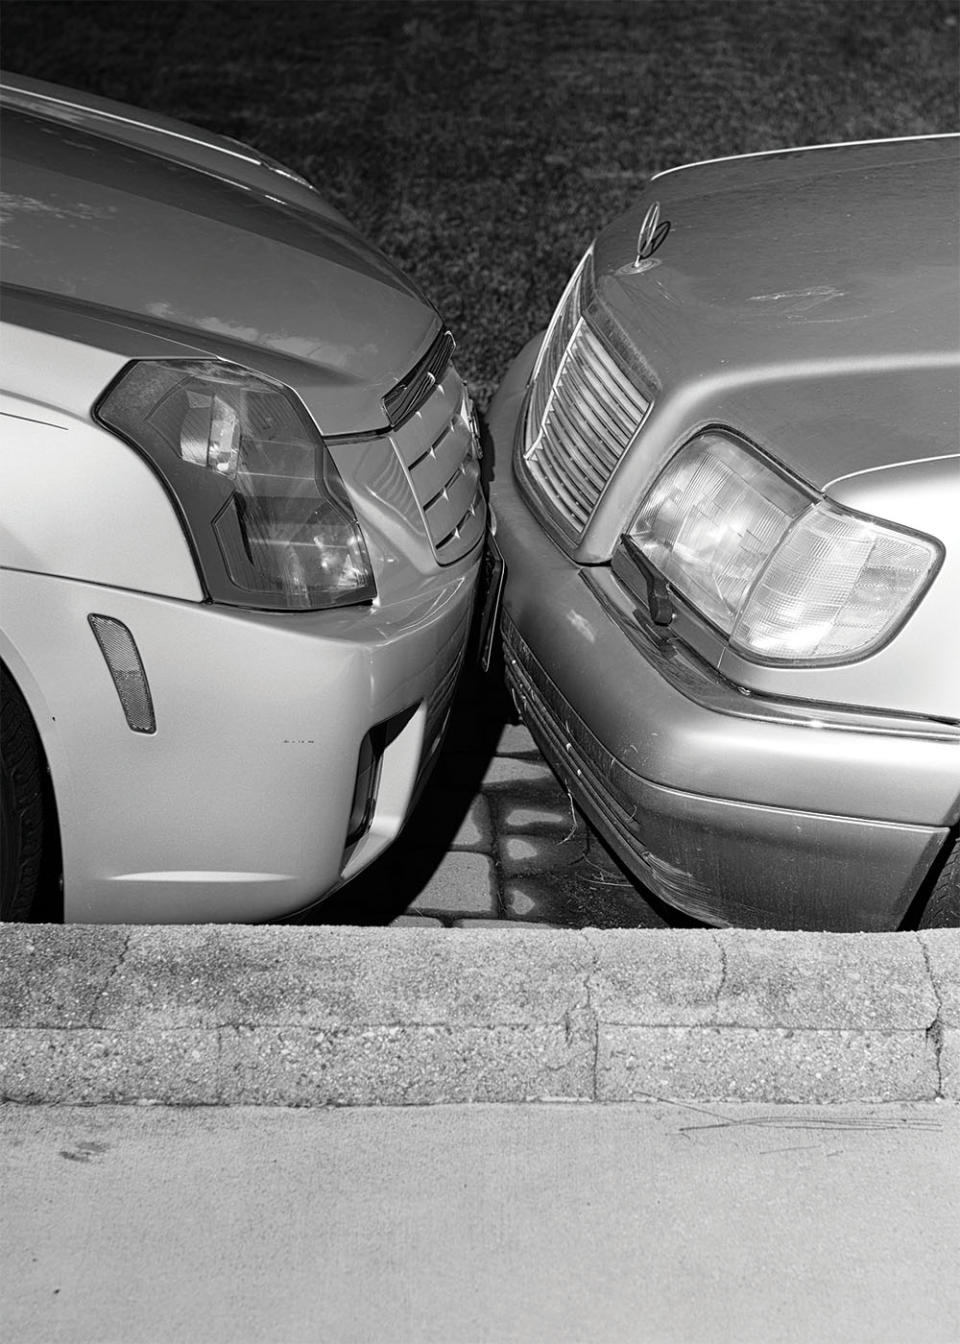 Seeing a parking job like this makes me smile — as long as it’s not my car, says photographer Maggie Shannon.